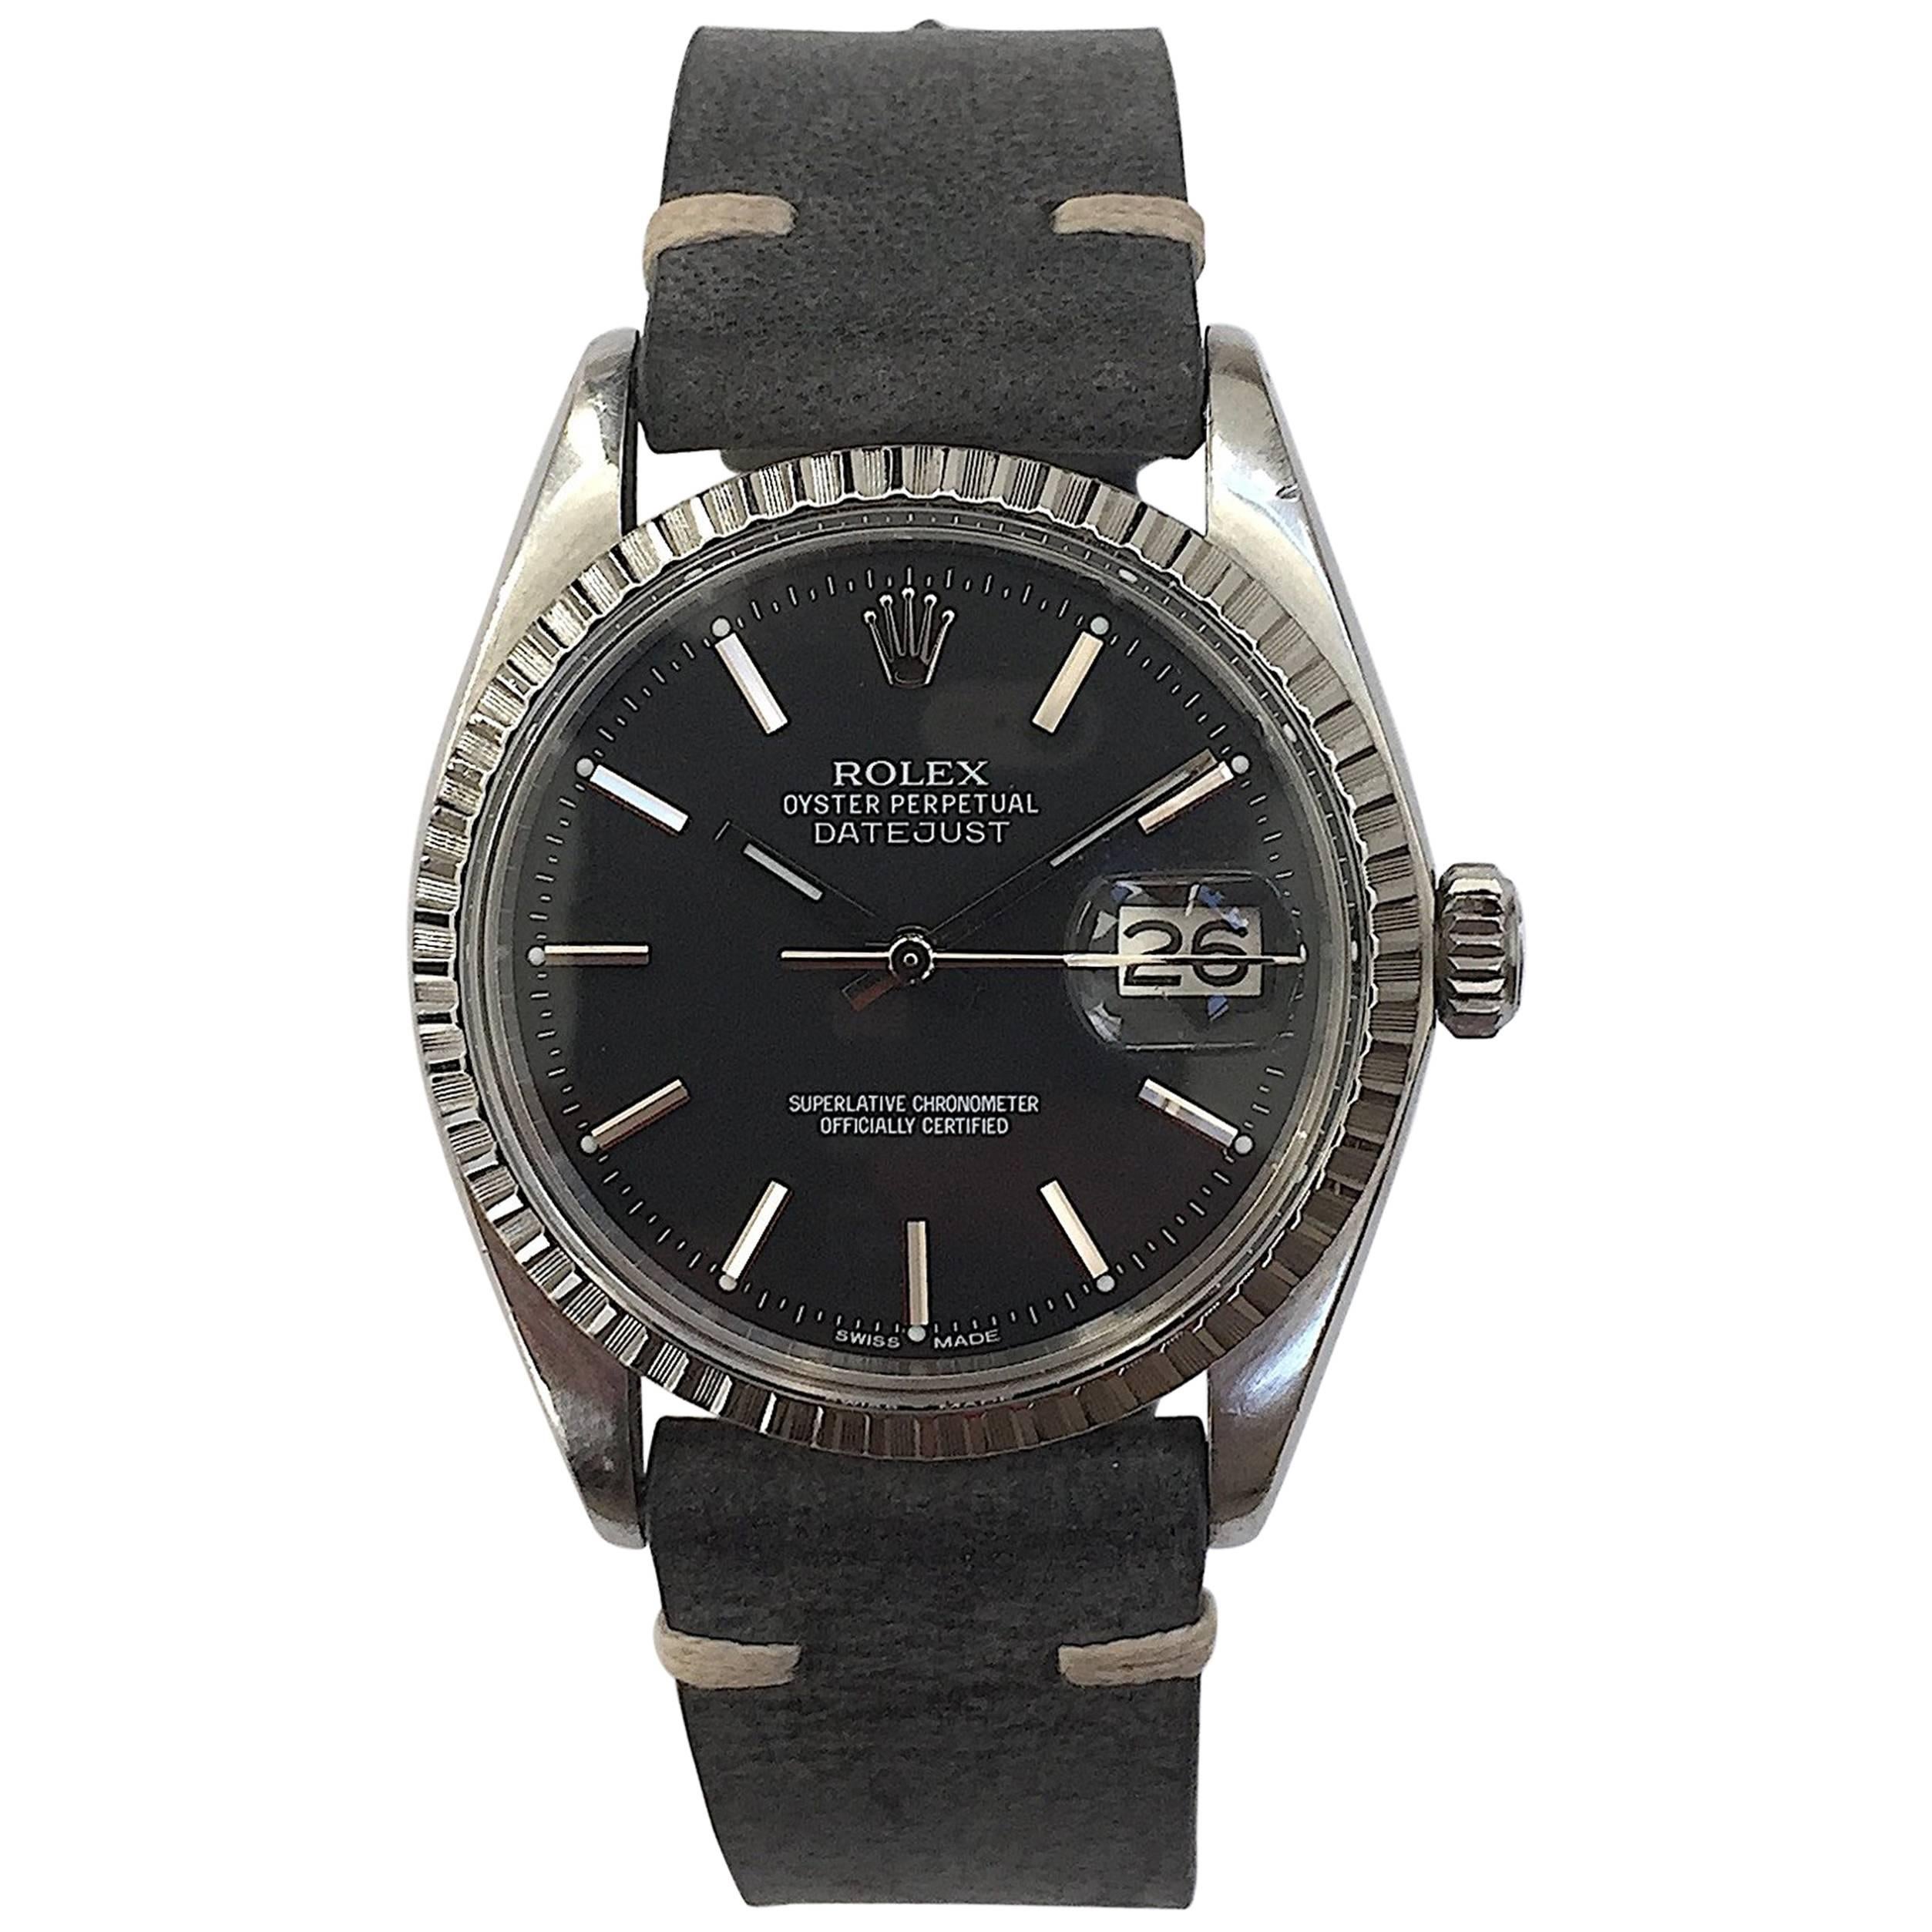 Rolex Stainless Steel Black Dial Oyster Perpetual Datejust Wristwatch, 1970s